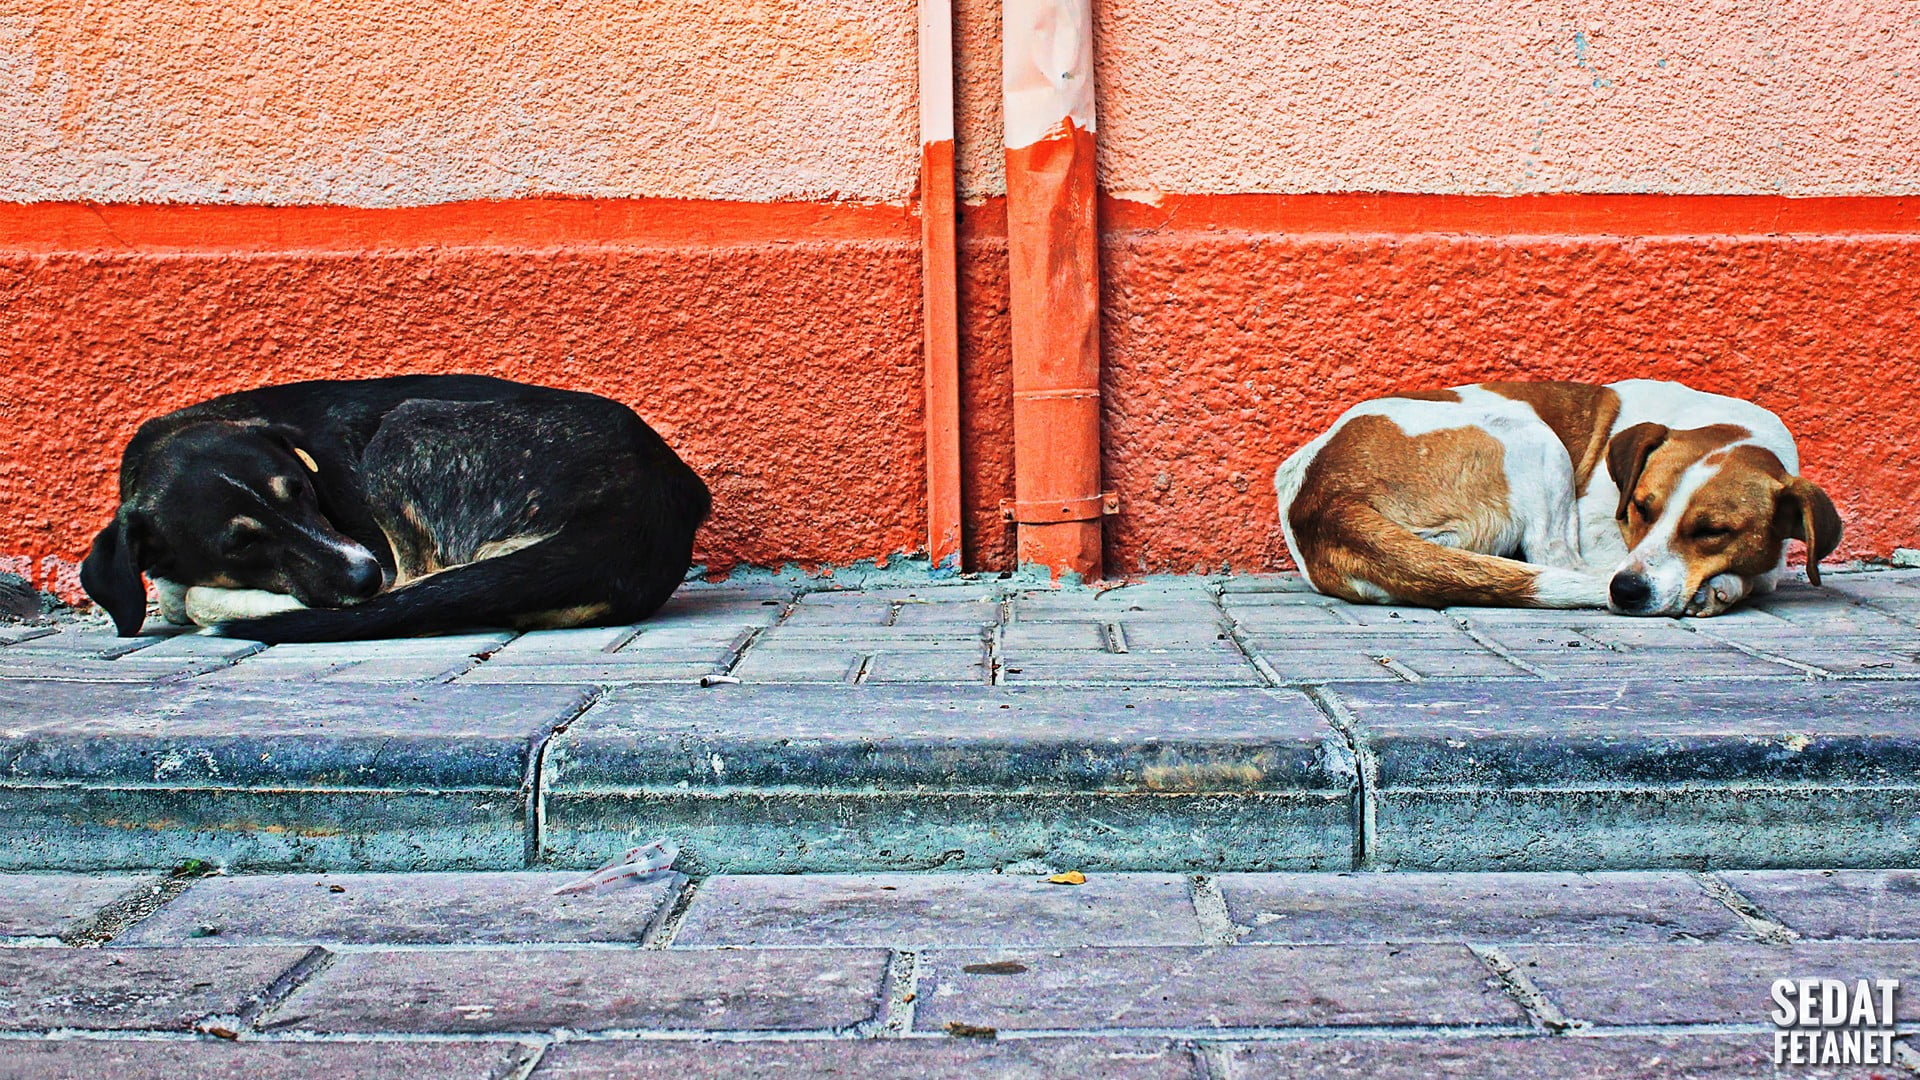 white and black dogs, dog, animals, street, wall